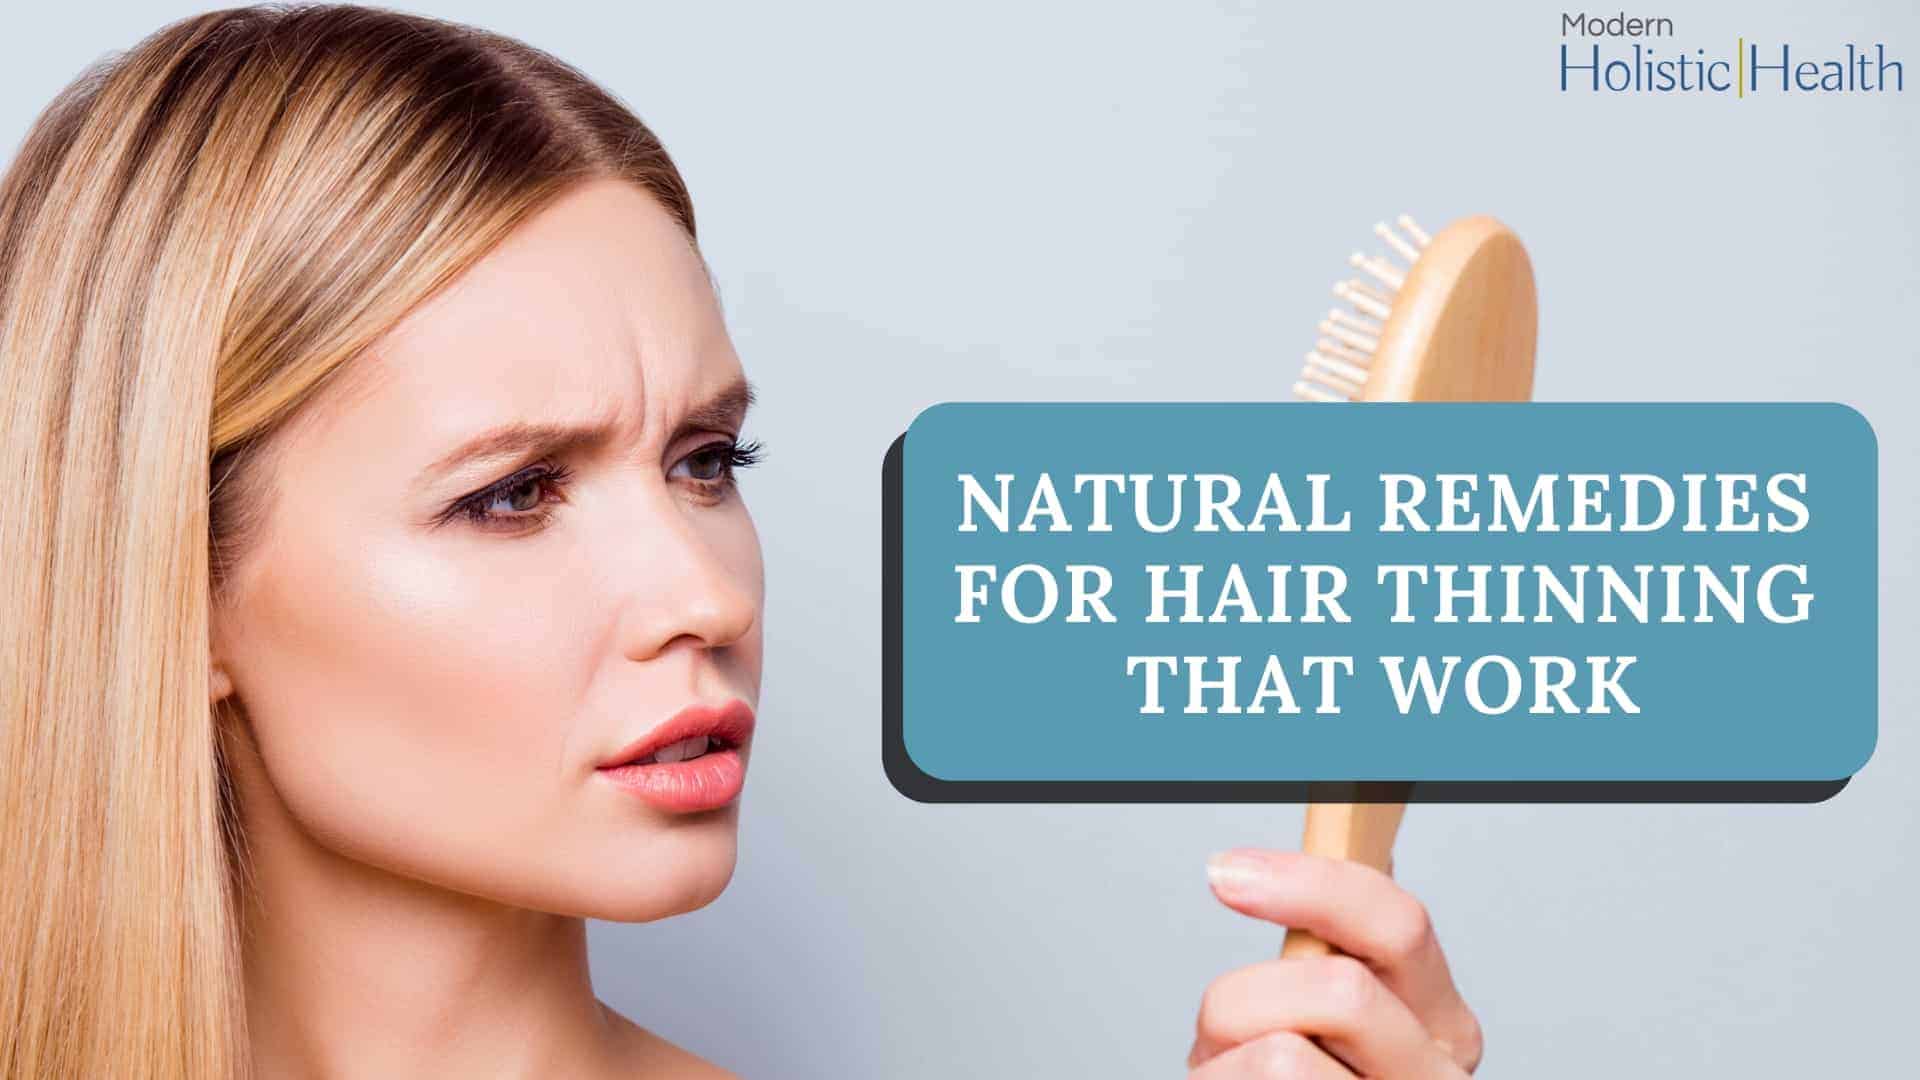 Natural Remedies for Hair Thinning That Work | Modern Holistic Health